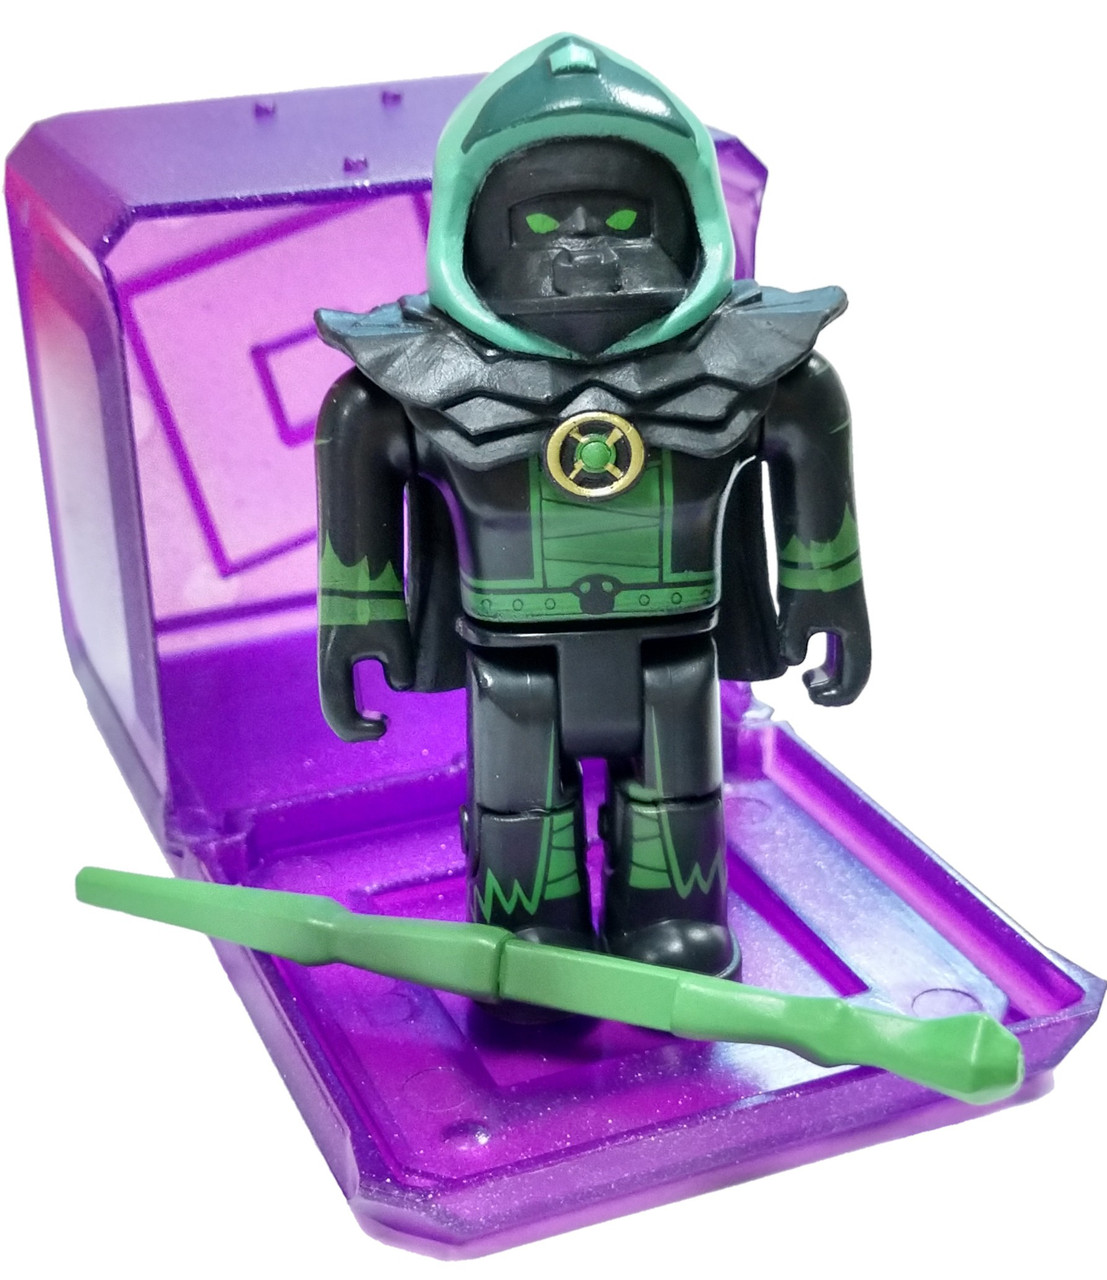 Roblox Celebrity Collection Series 3 Sethalonian 3 Mini Figure With Cube And Online Code Loose Jazwares Toywiz - 2016 november robot dog code roblox